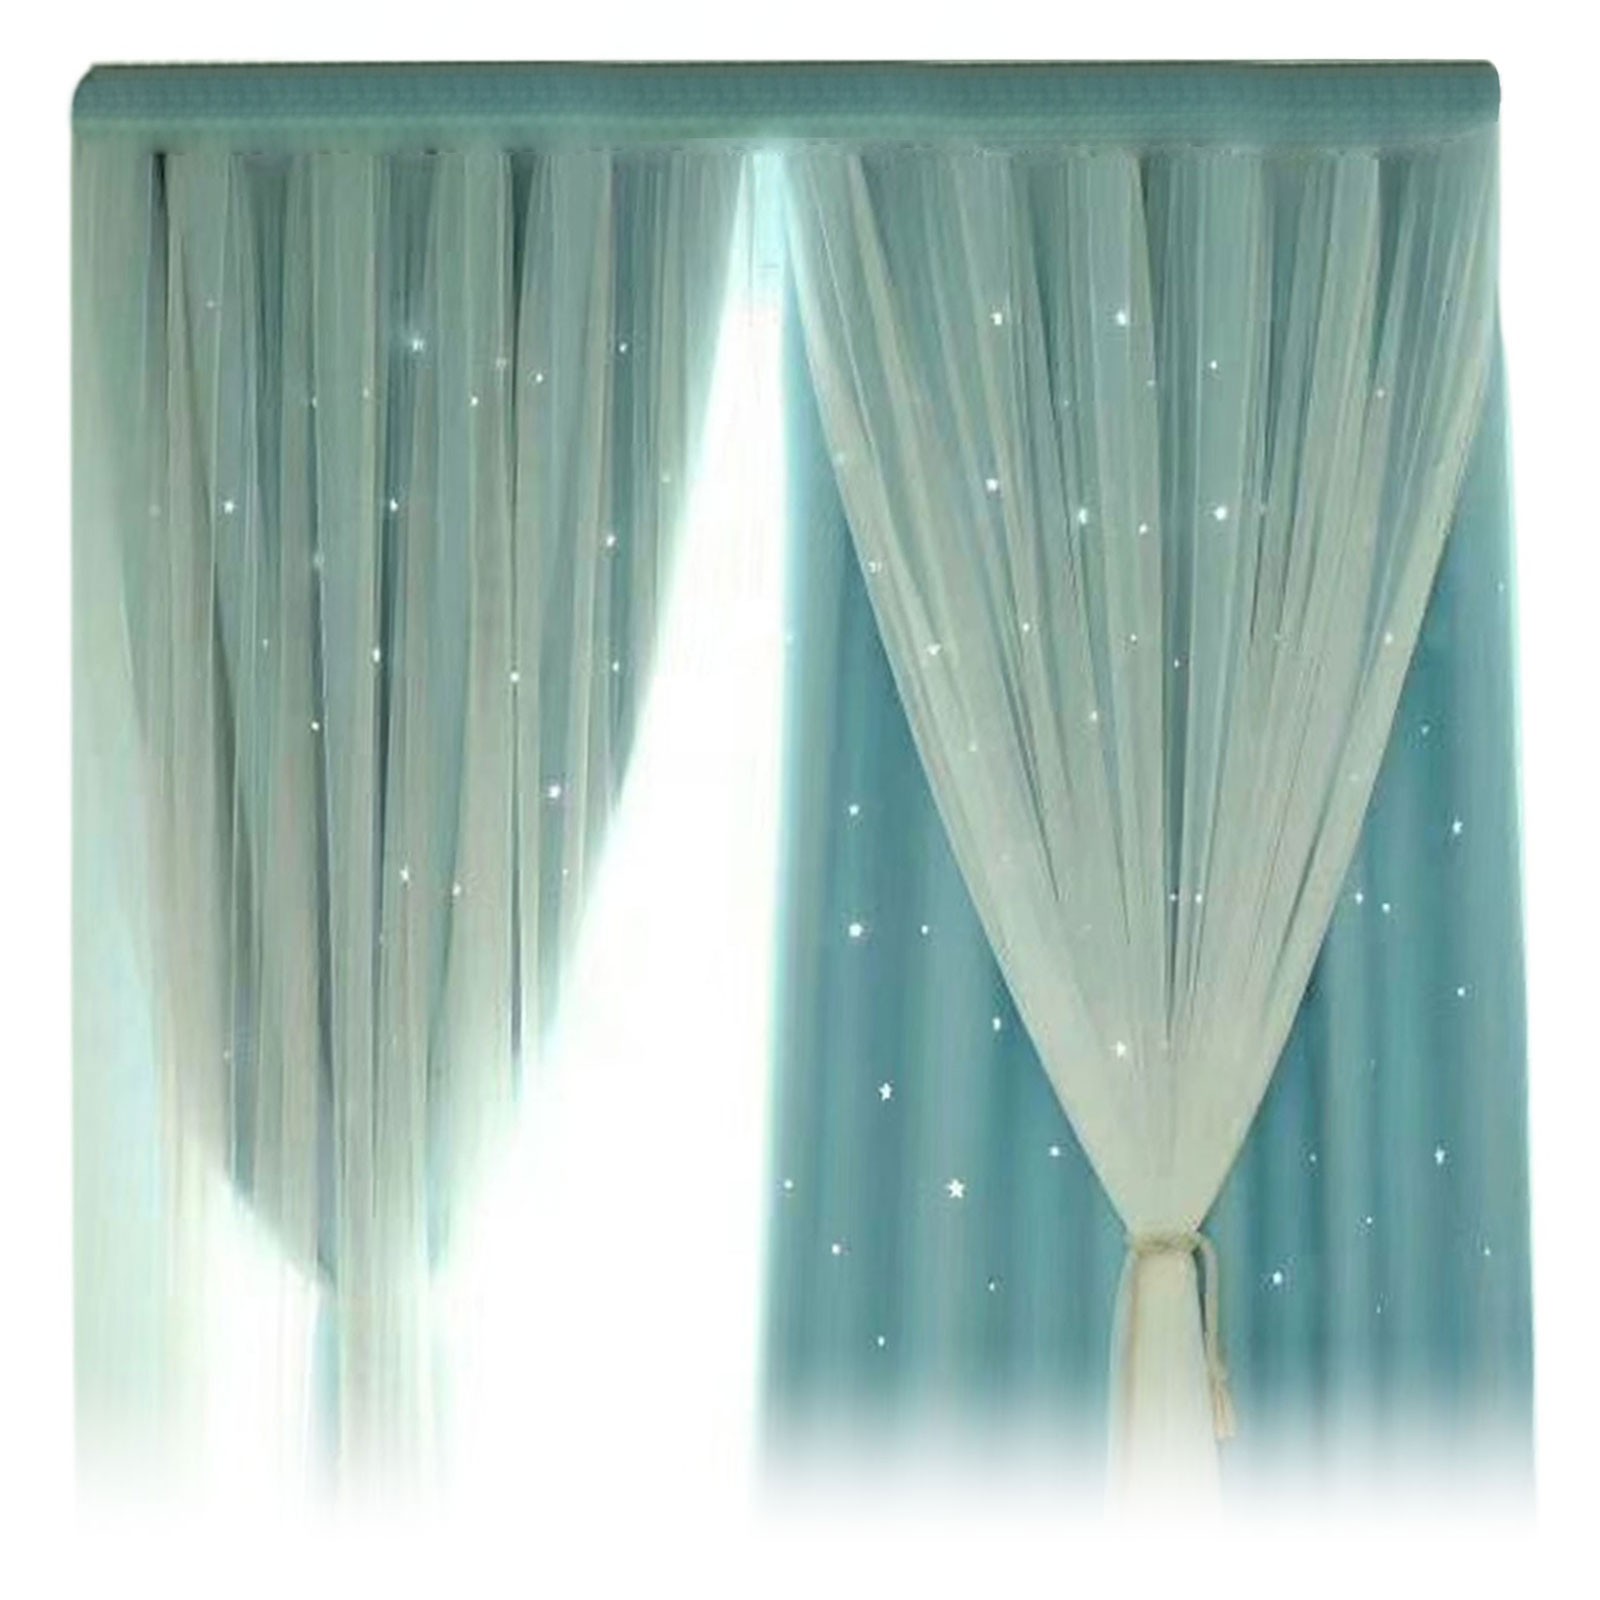 Cold Curtains 48 in Curtains 6 Piece Rainbow Sheer Window Panel Curtain Set Precision Thickened Star Plaid Shower Curtain Long Shower Curtain Liner 96 Length Shower Curtain with Clear Top Panel - image 1 of 2